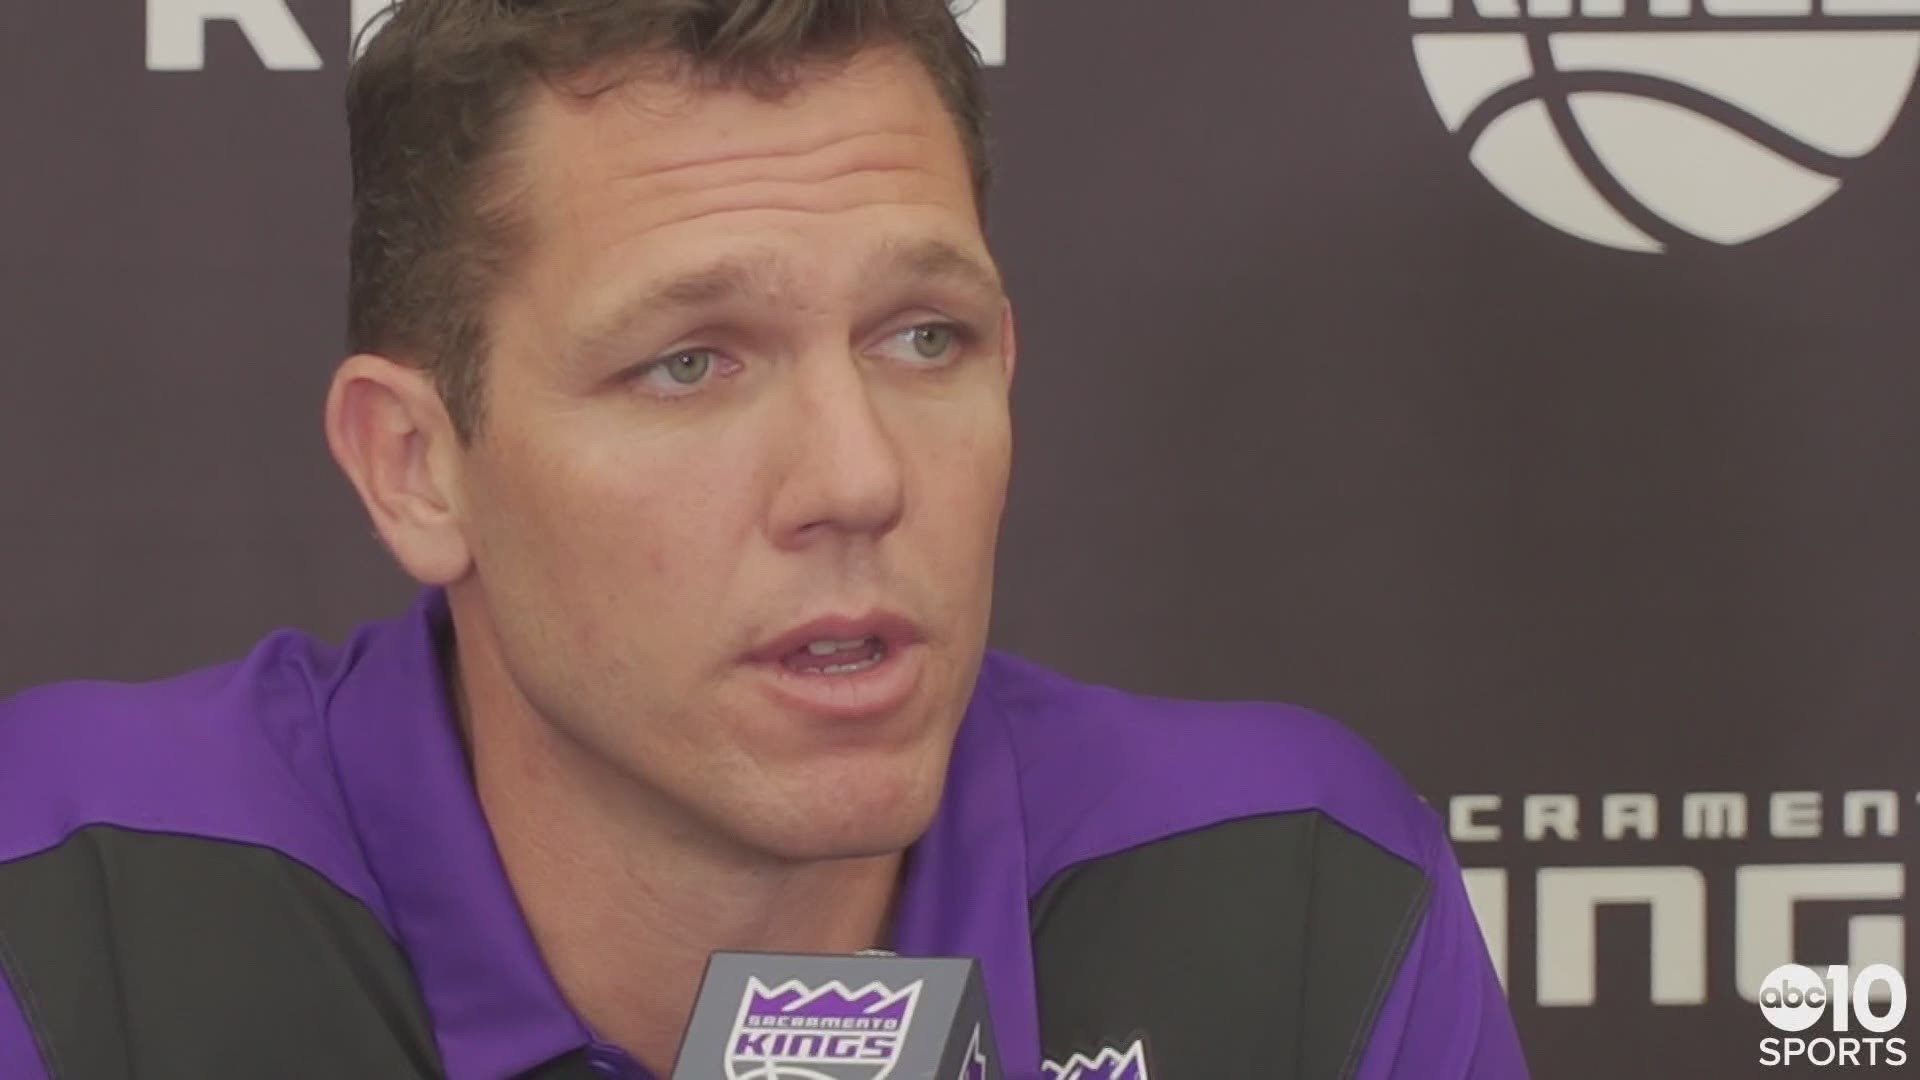 Luke Walton becomes the 10th head coach of the Sacramento Kings since they last made the playoffs in 2006.